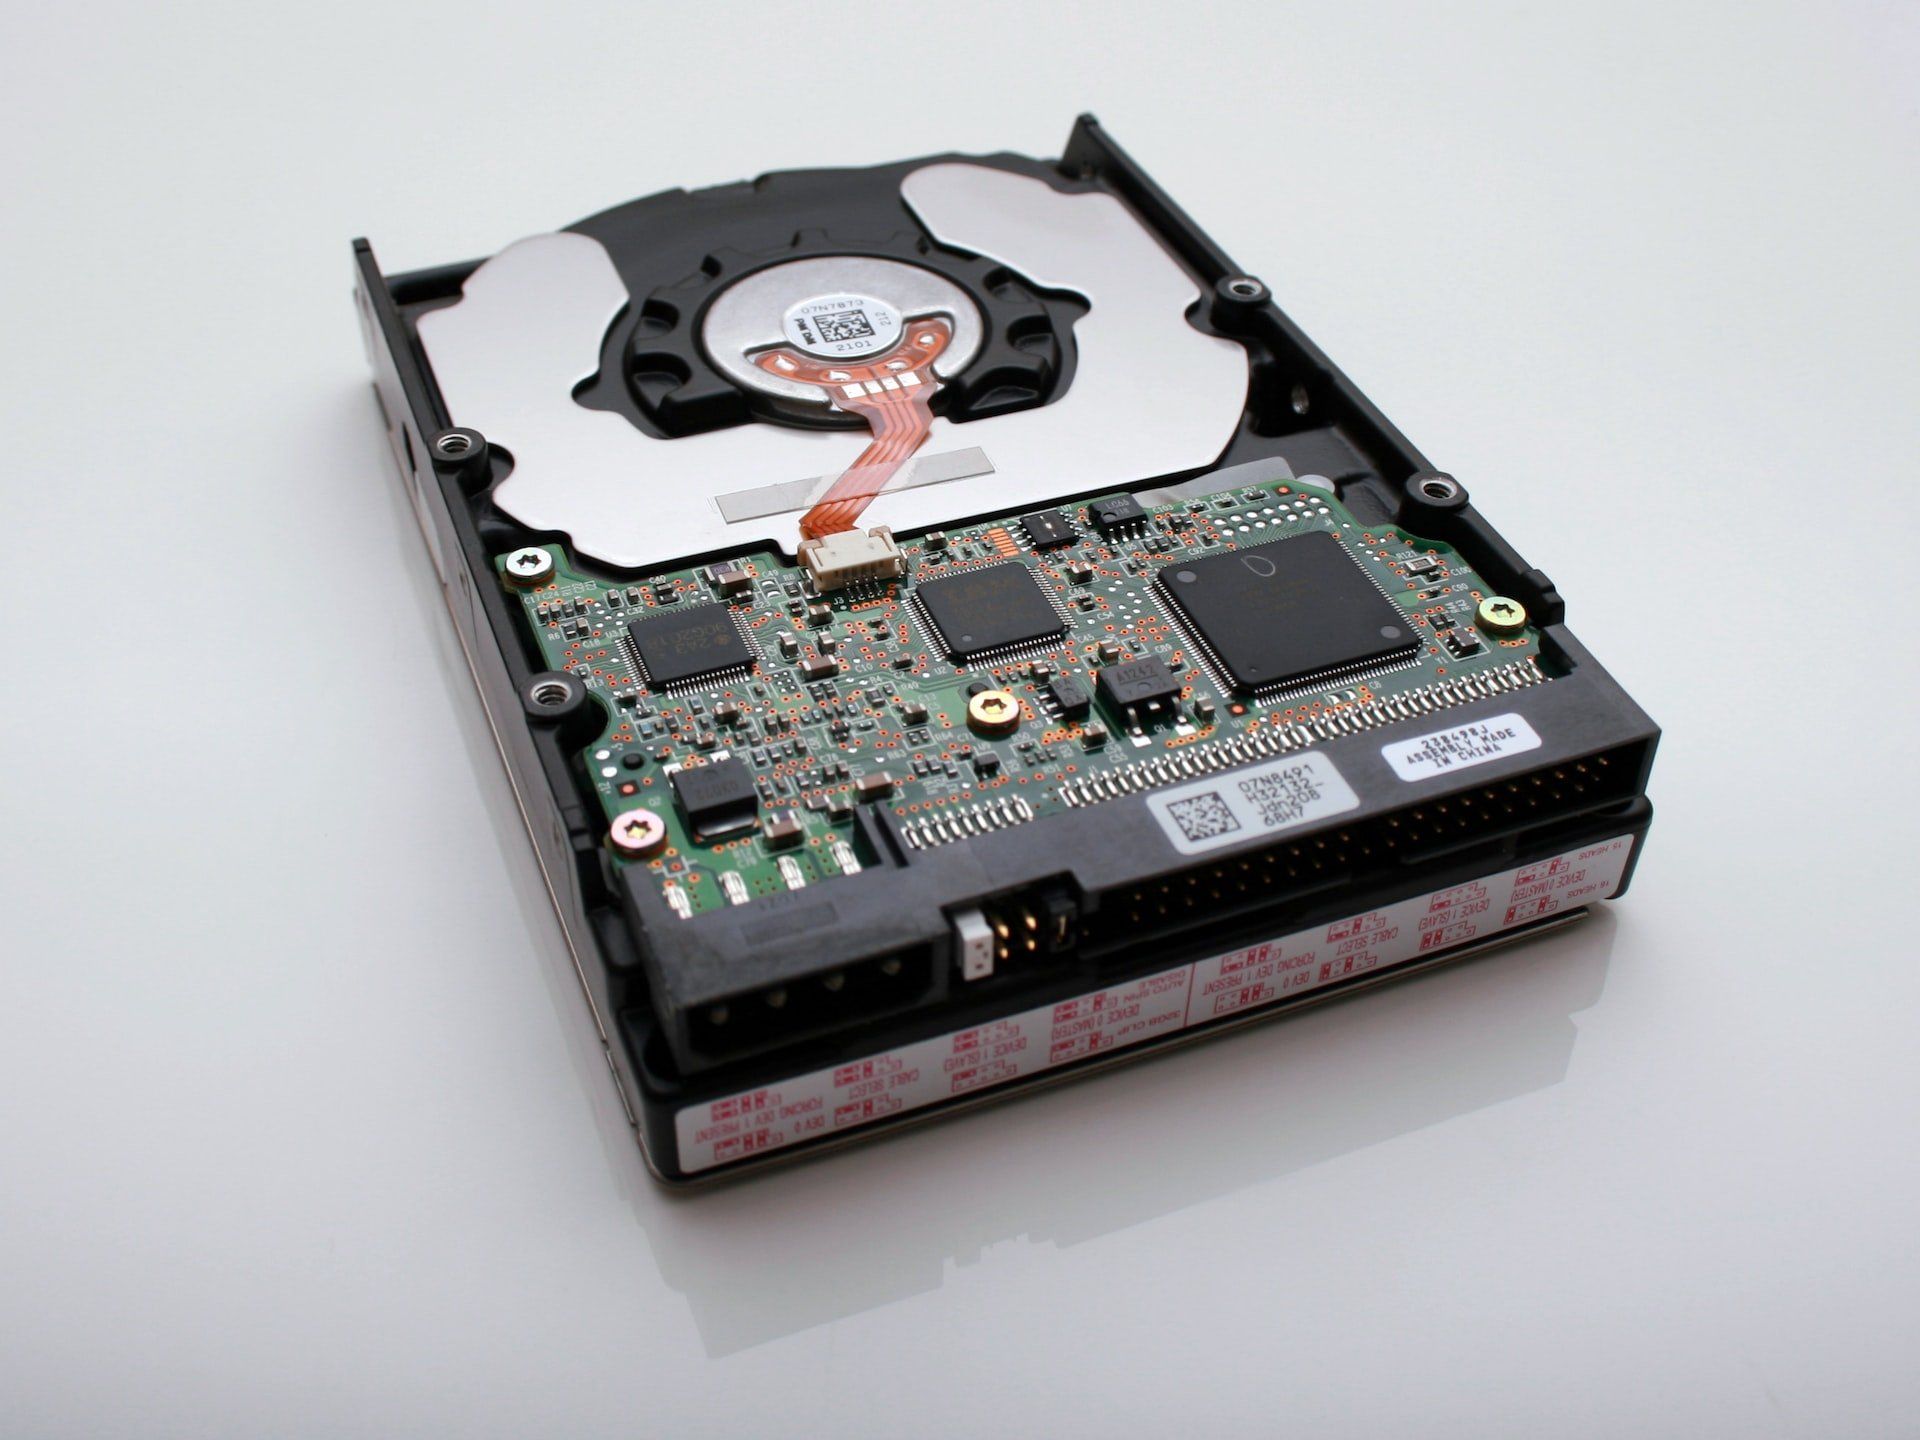 Image of the inside of a CD rom drive, showing the benefits of cloud storage